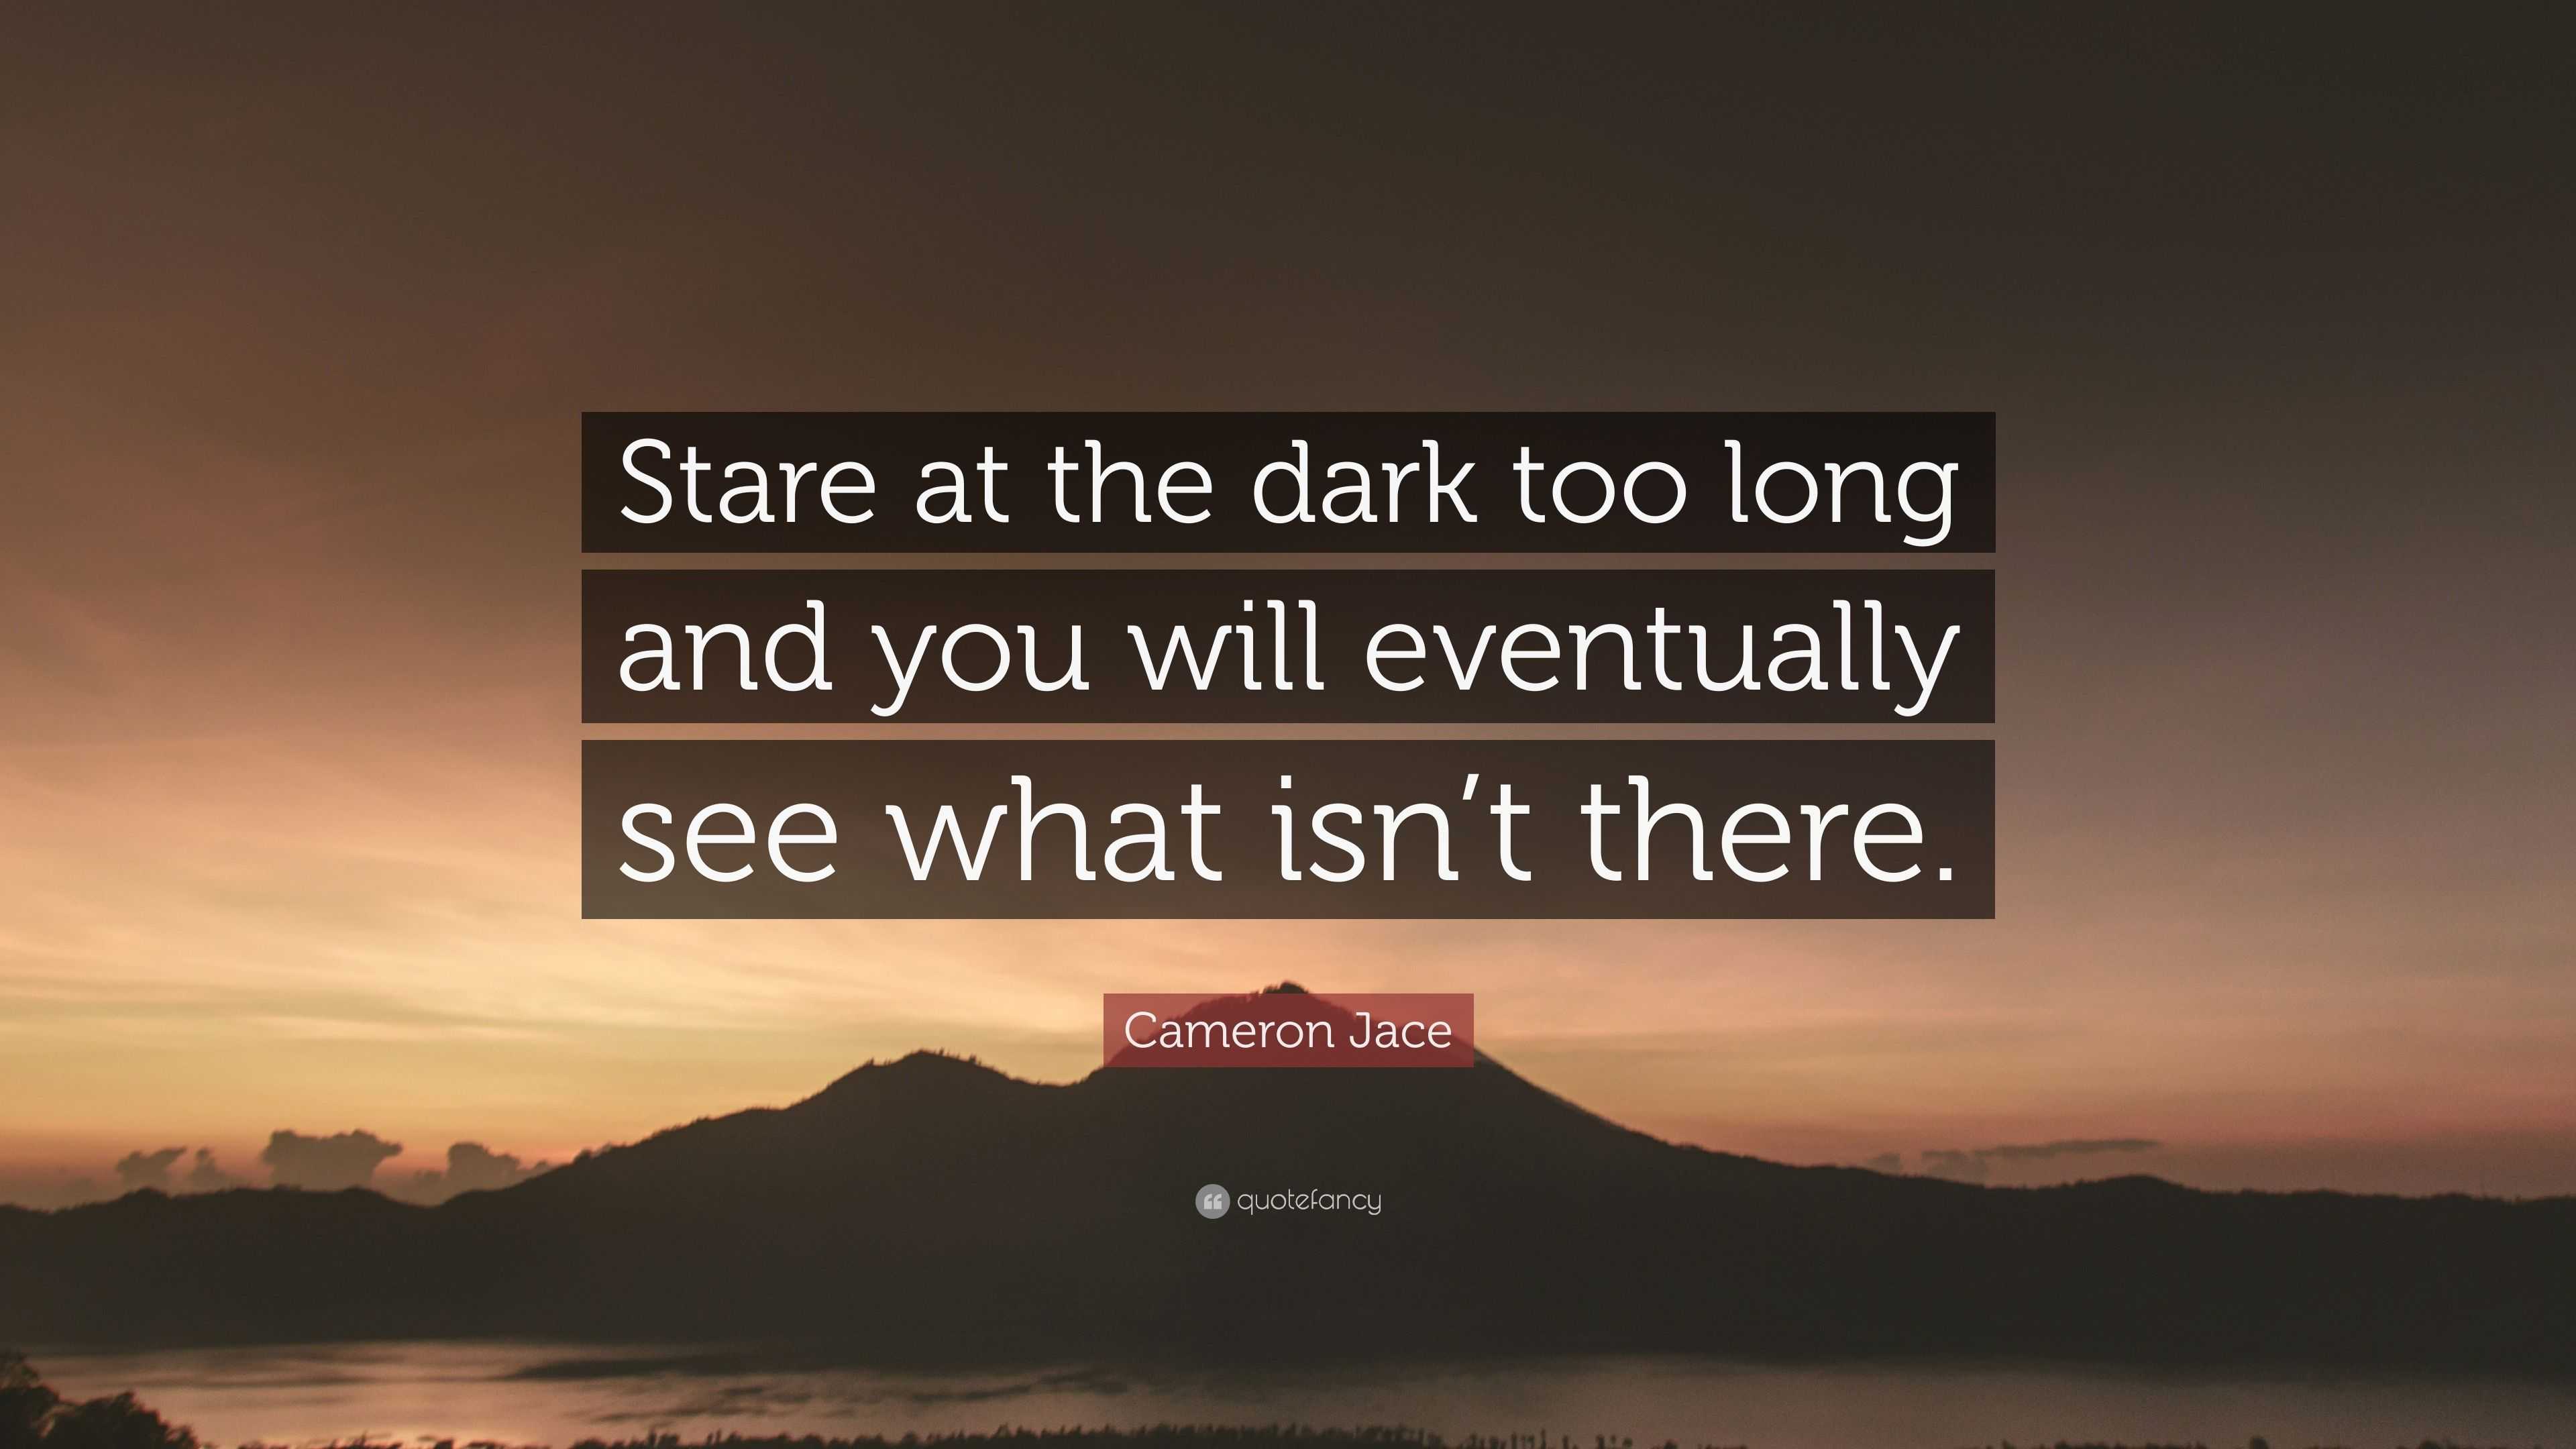 Cameron Jace Quote  Stare at the dark  too long and you 